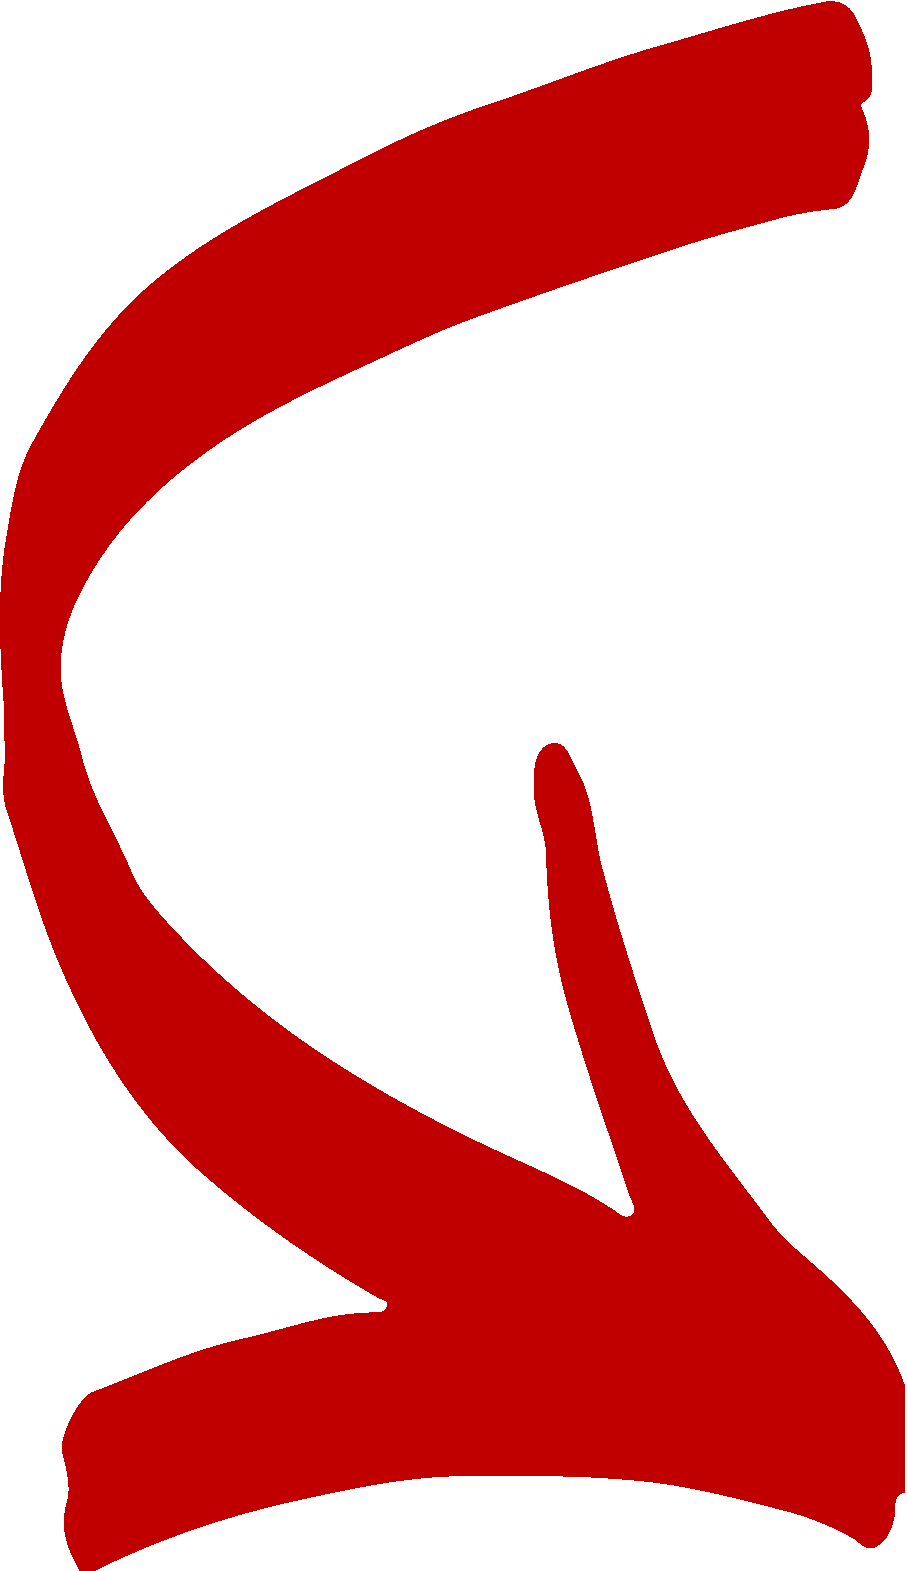 A Red Arrow On A Black Background